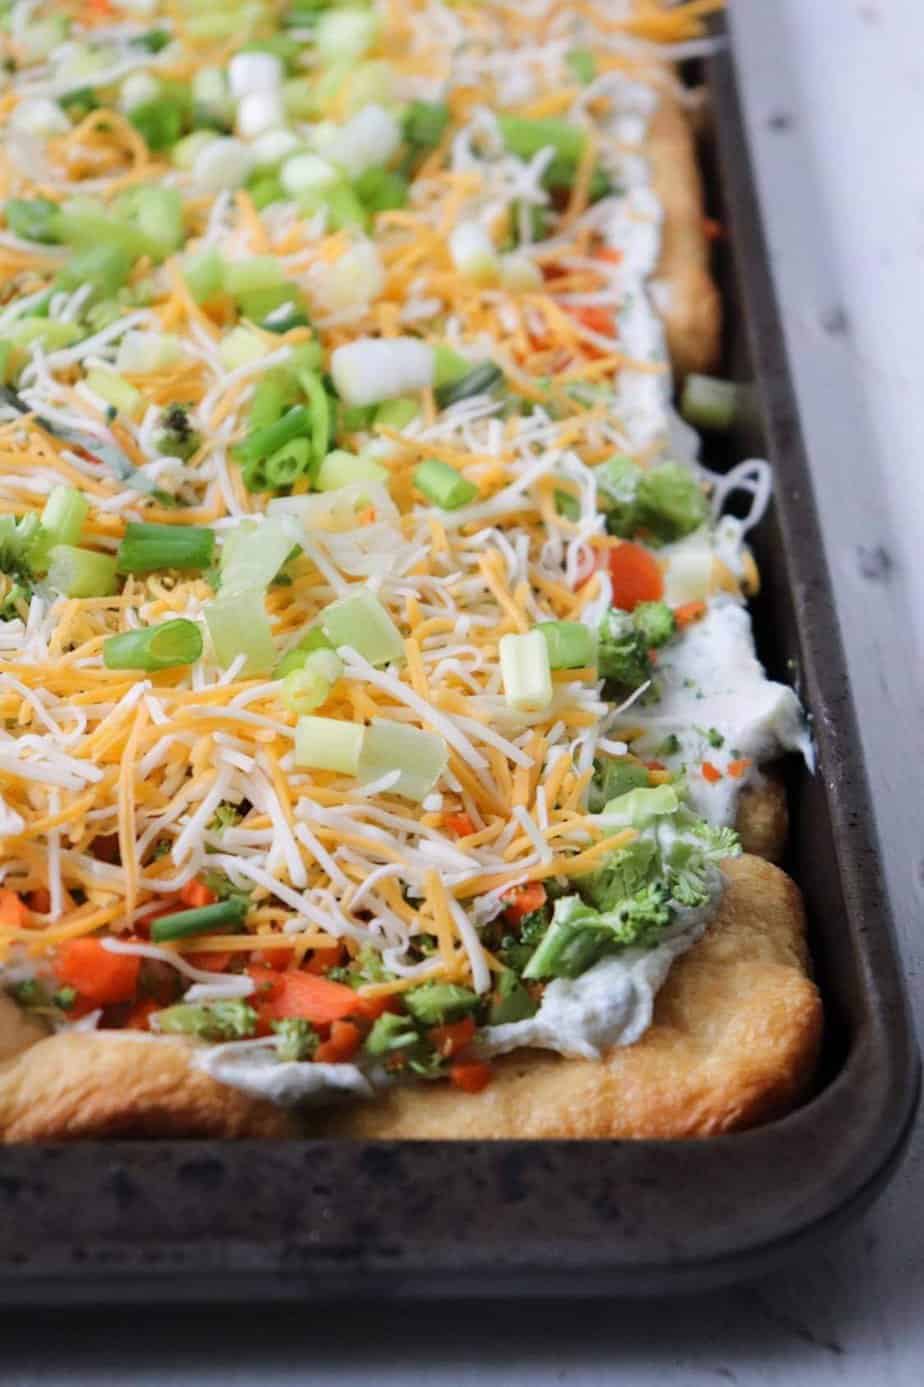 Buttery and pillowy soft crescent roll dough is topped with a cream cheese ranch sauce, veggies, and cheese.